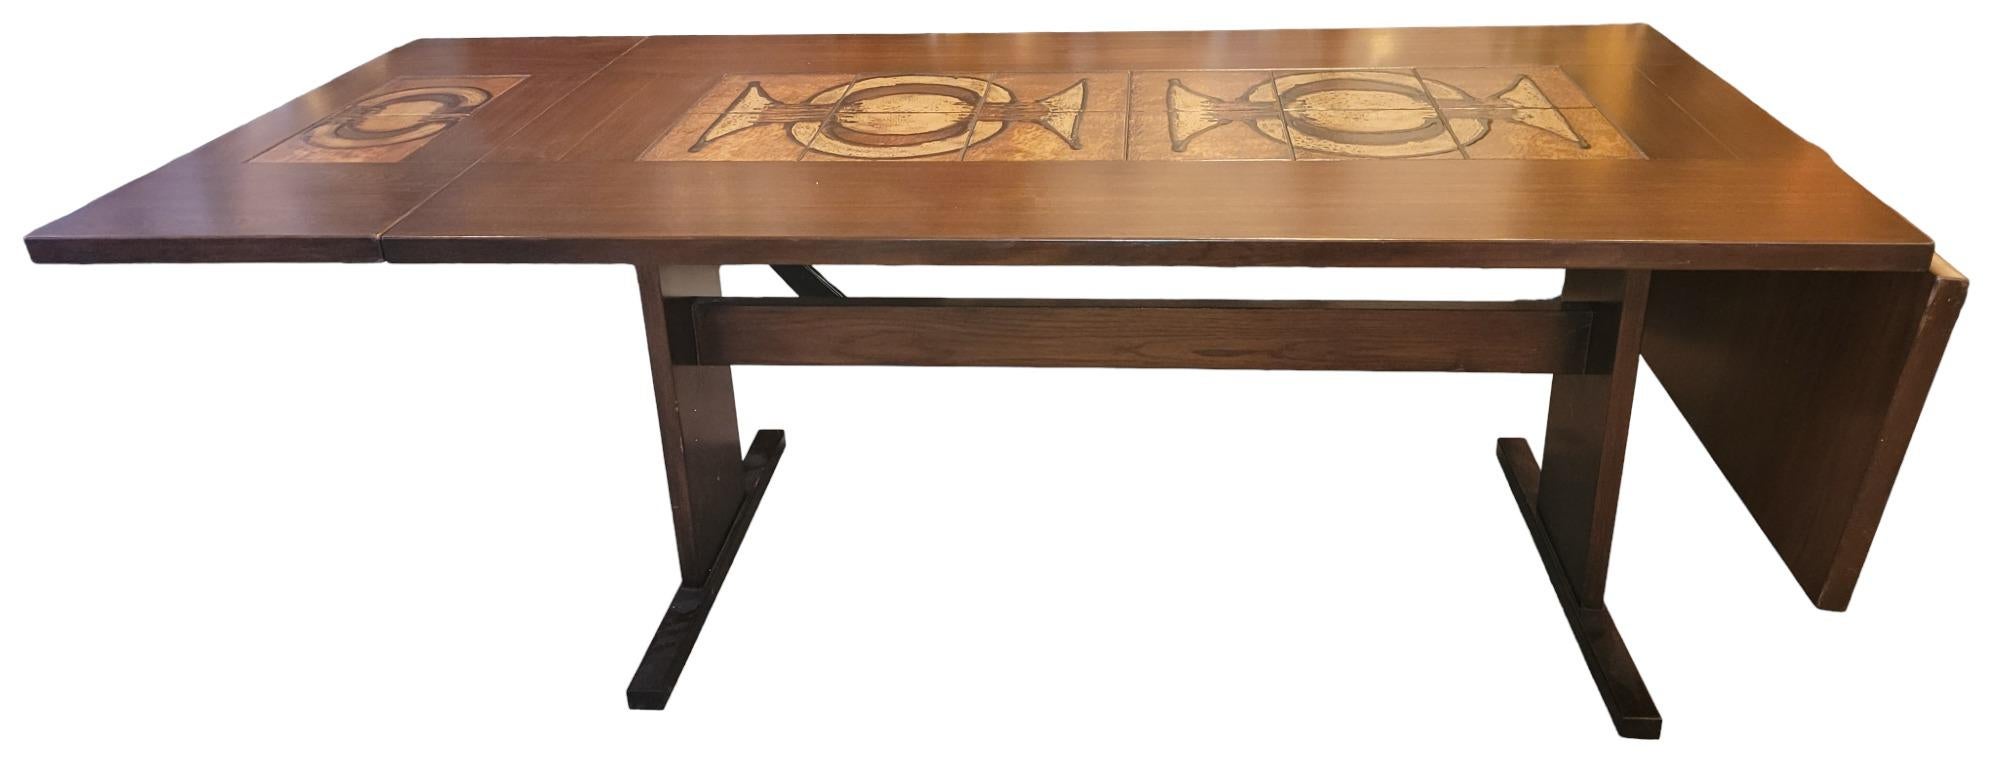 Mid-Century Modern Signed Mcm Mahogany & Tile Dining Table by Gangso Mobler For Sale